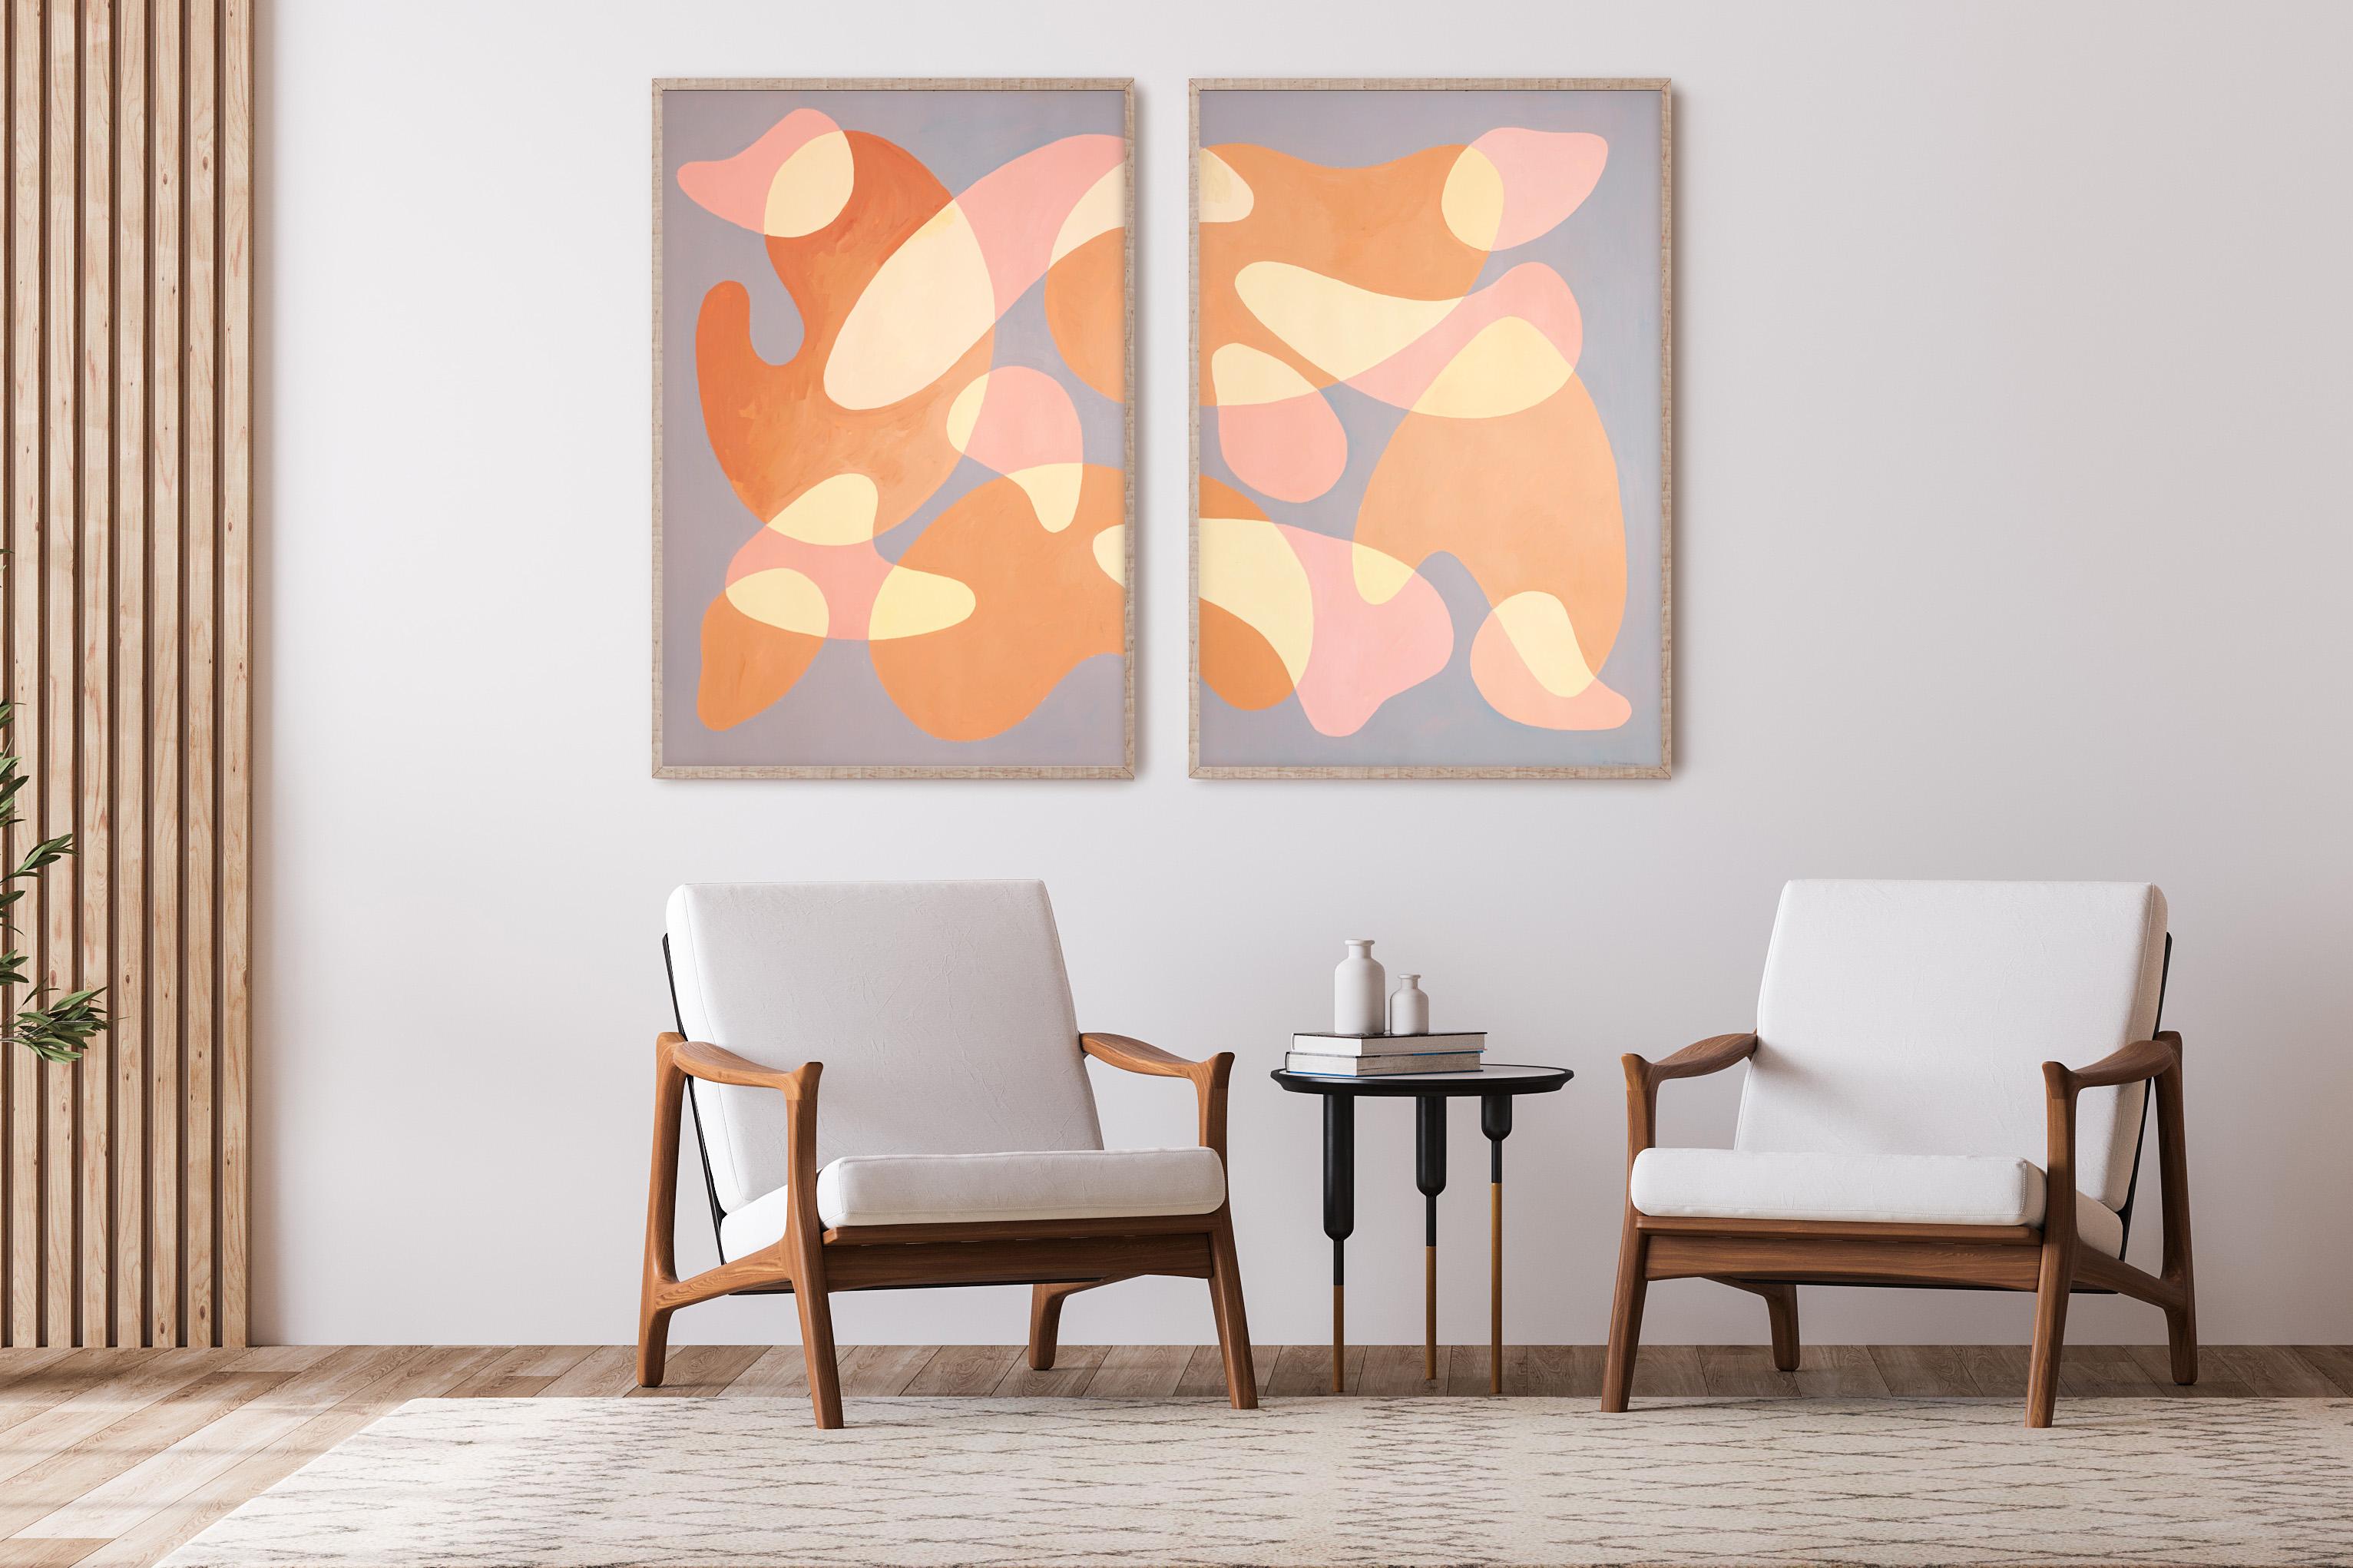 Dancing Bodies in a Dark Room, Nude Tones Diptych, Pale Pink Gray Organic Shapes - Painting by Ryan Rivadeneyra